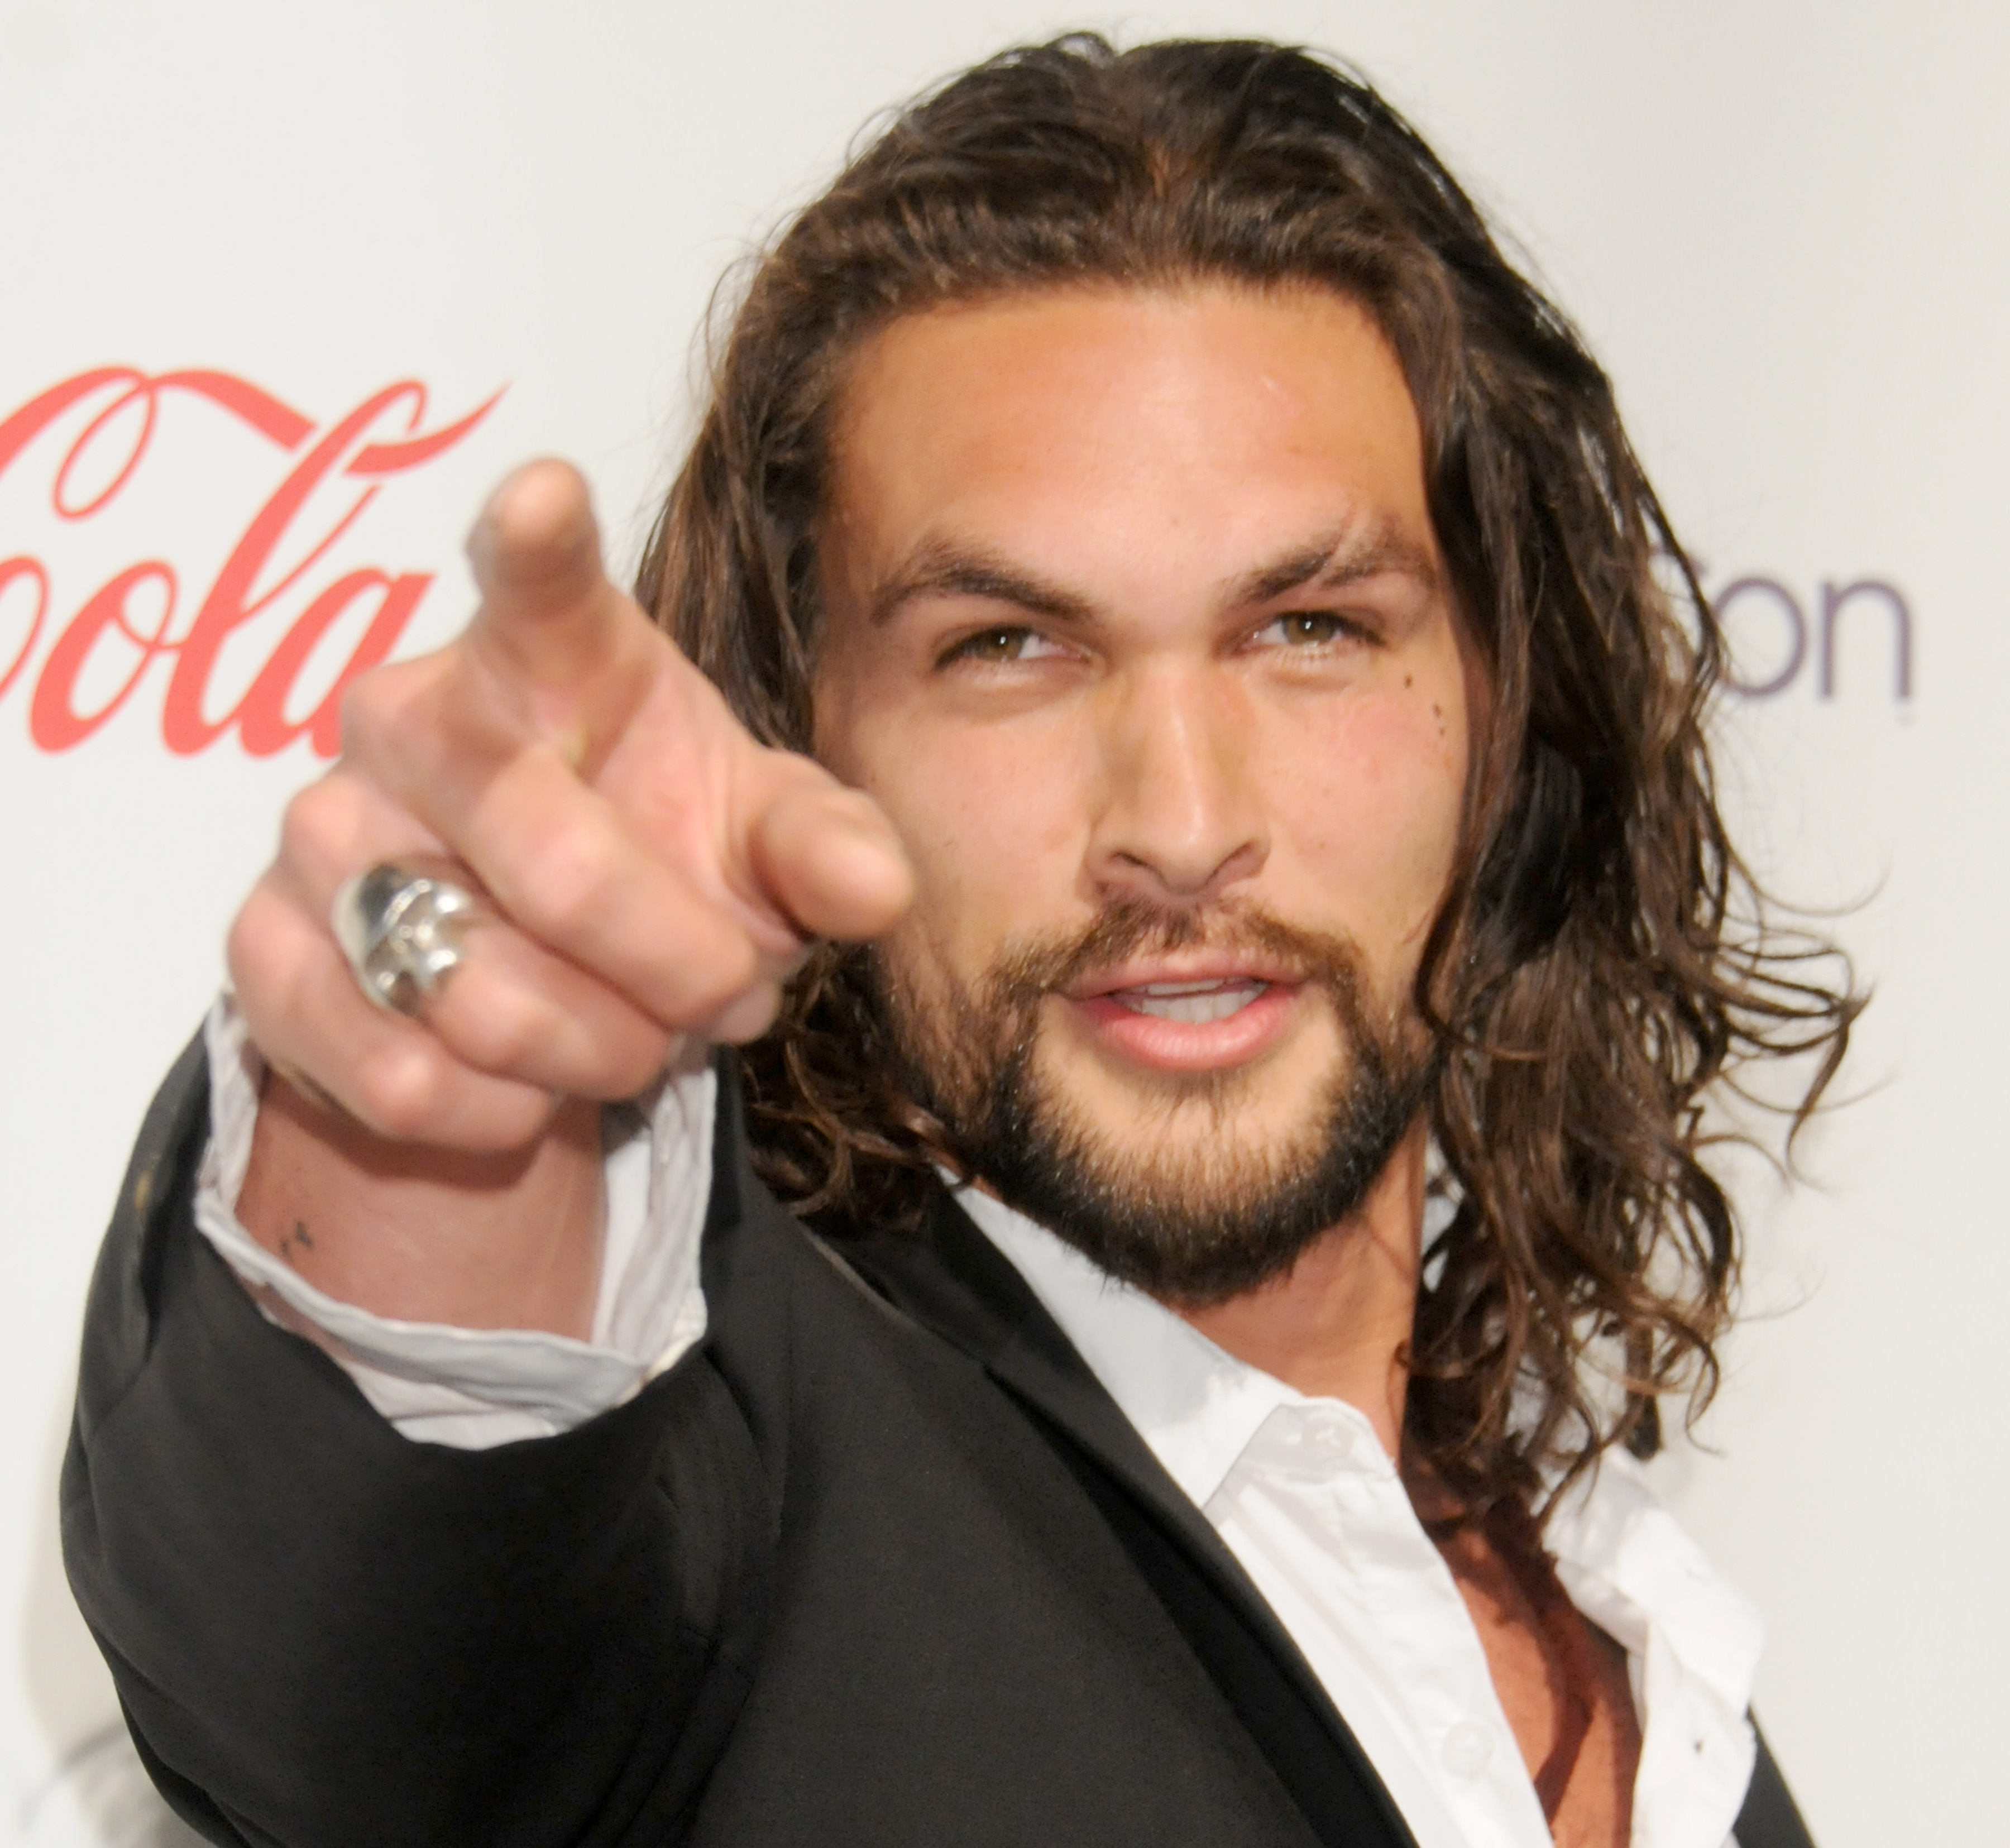 Jason Momoa arrives at the 2011 CinemaCon Big Screen Achievement Awards at Caesars Palace on March 31, 2011, in Las Vegas, Nevada. | Source: Getty Images